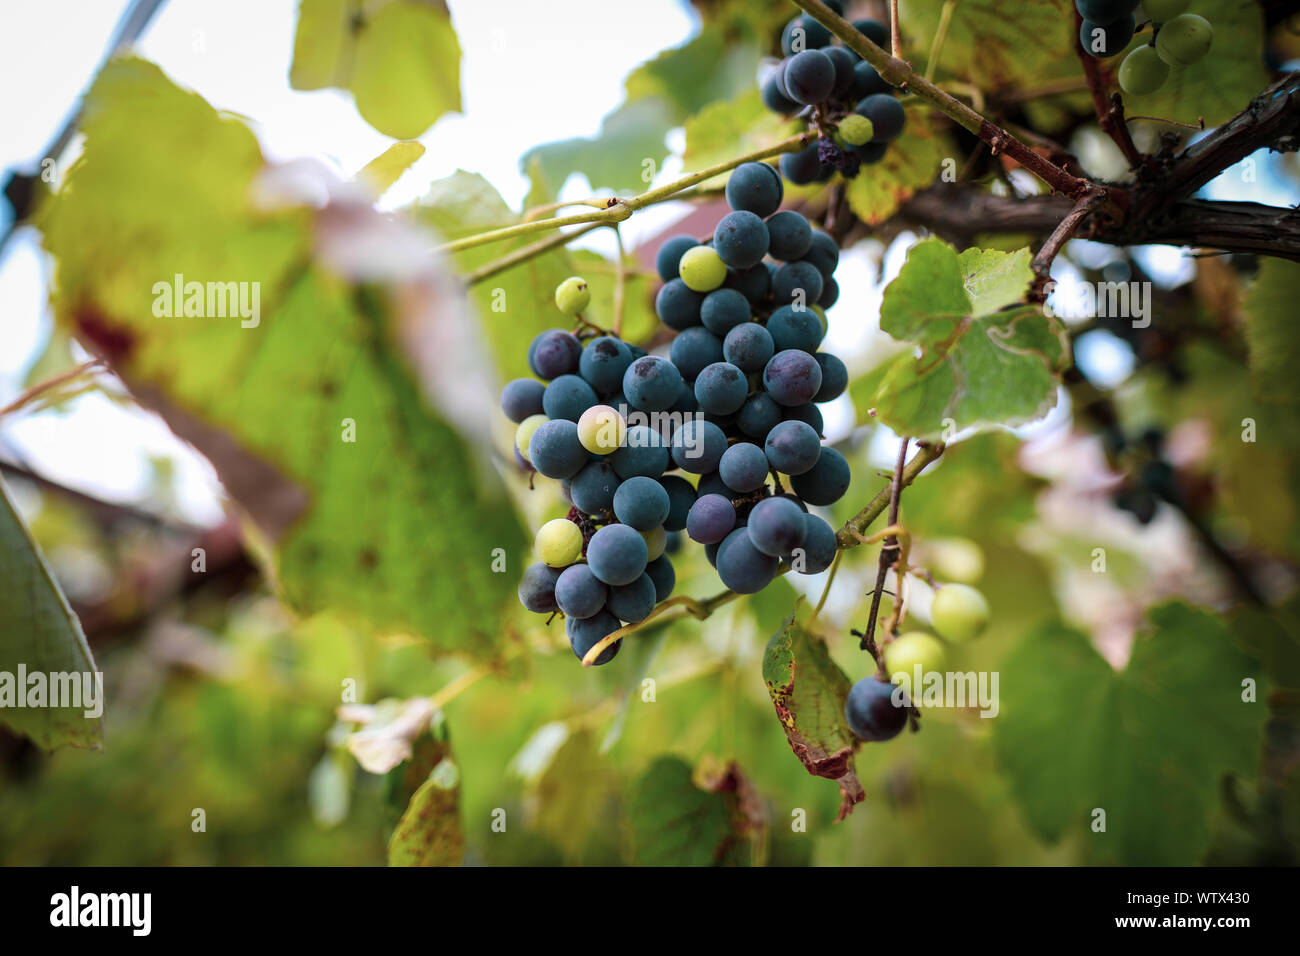 Black grapes in the vineyard during an early autumn day Stock Photo